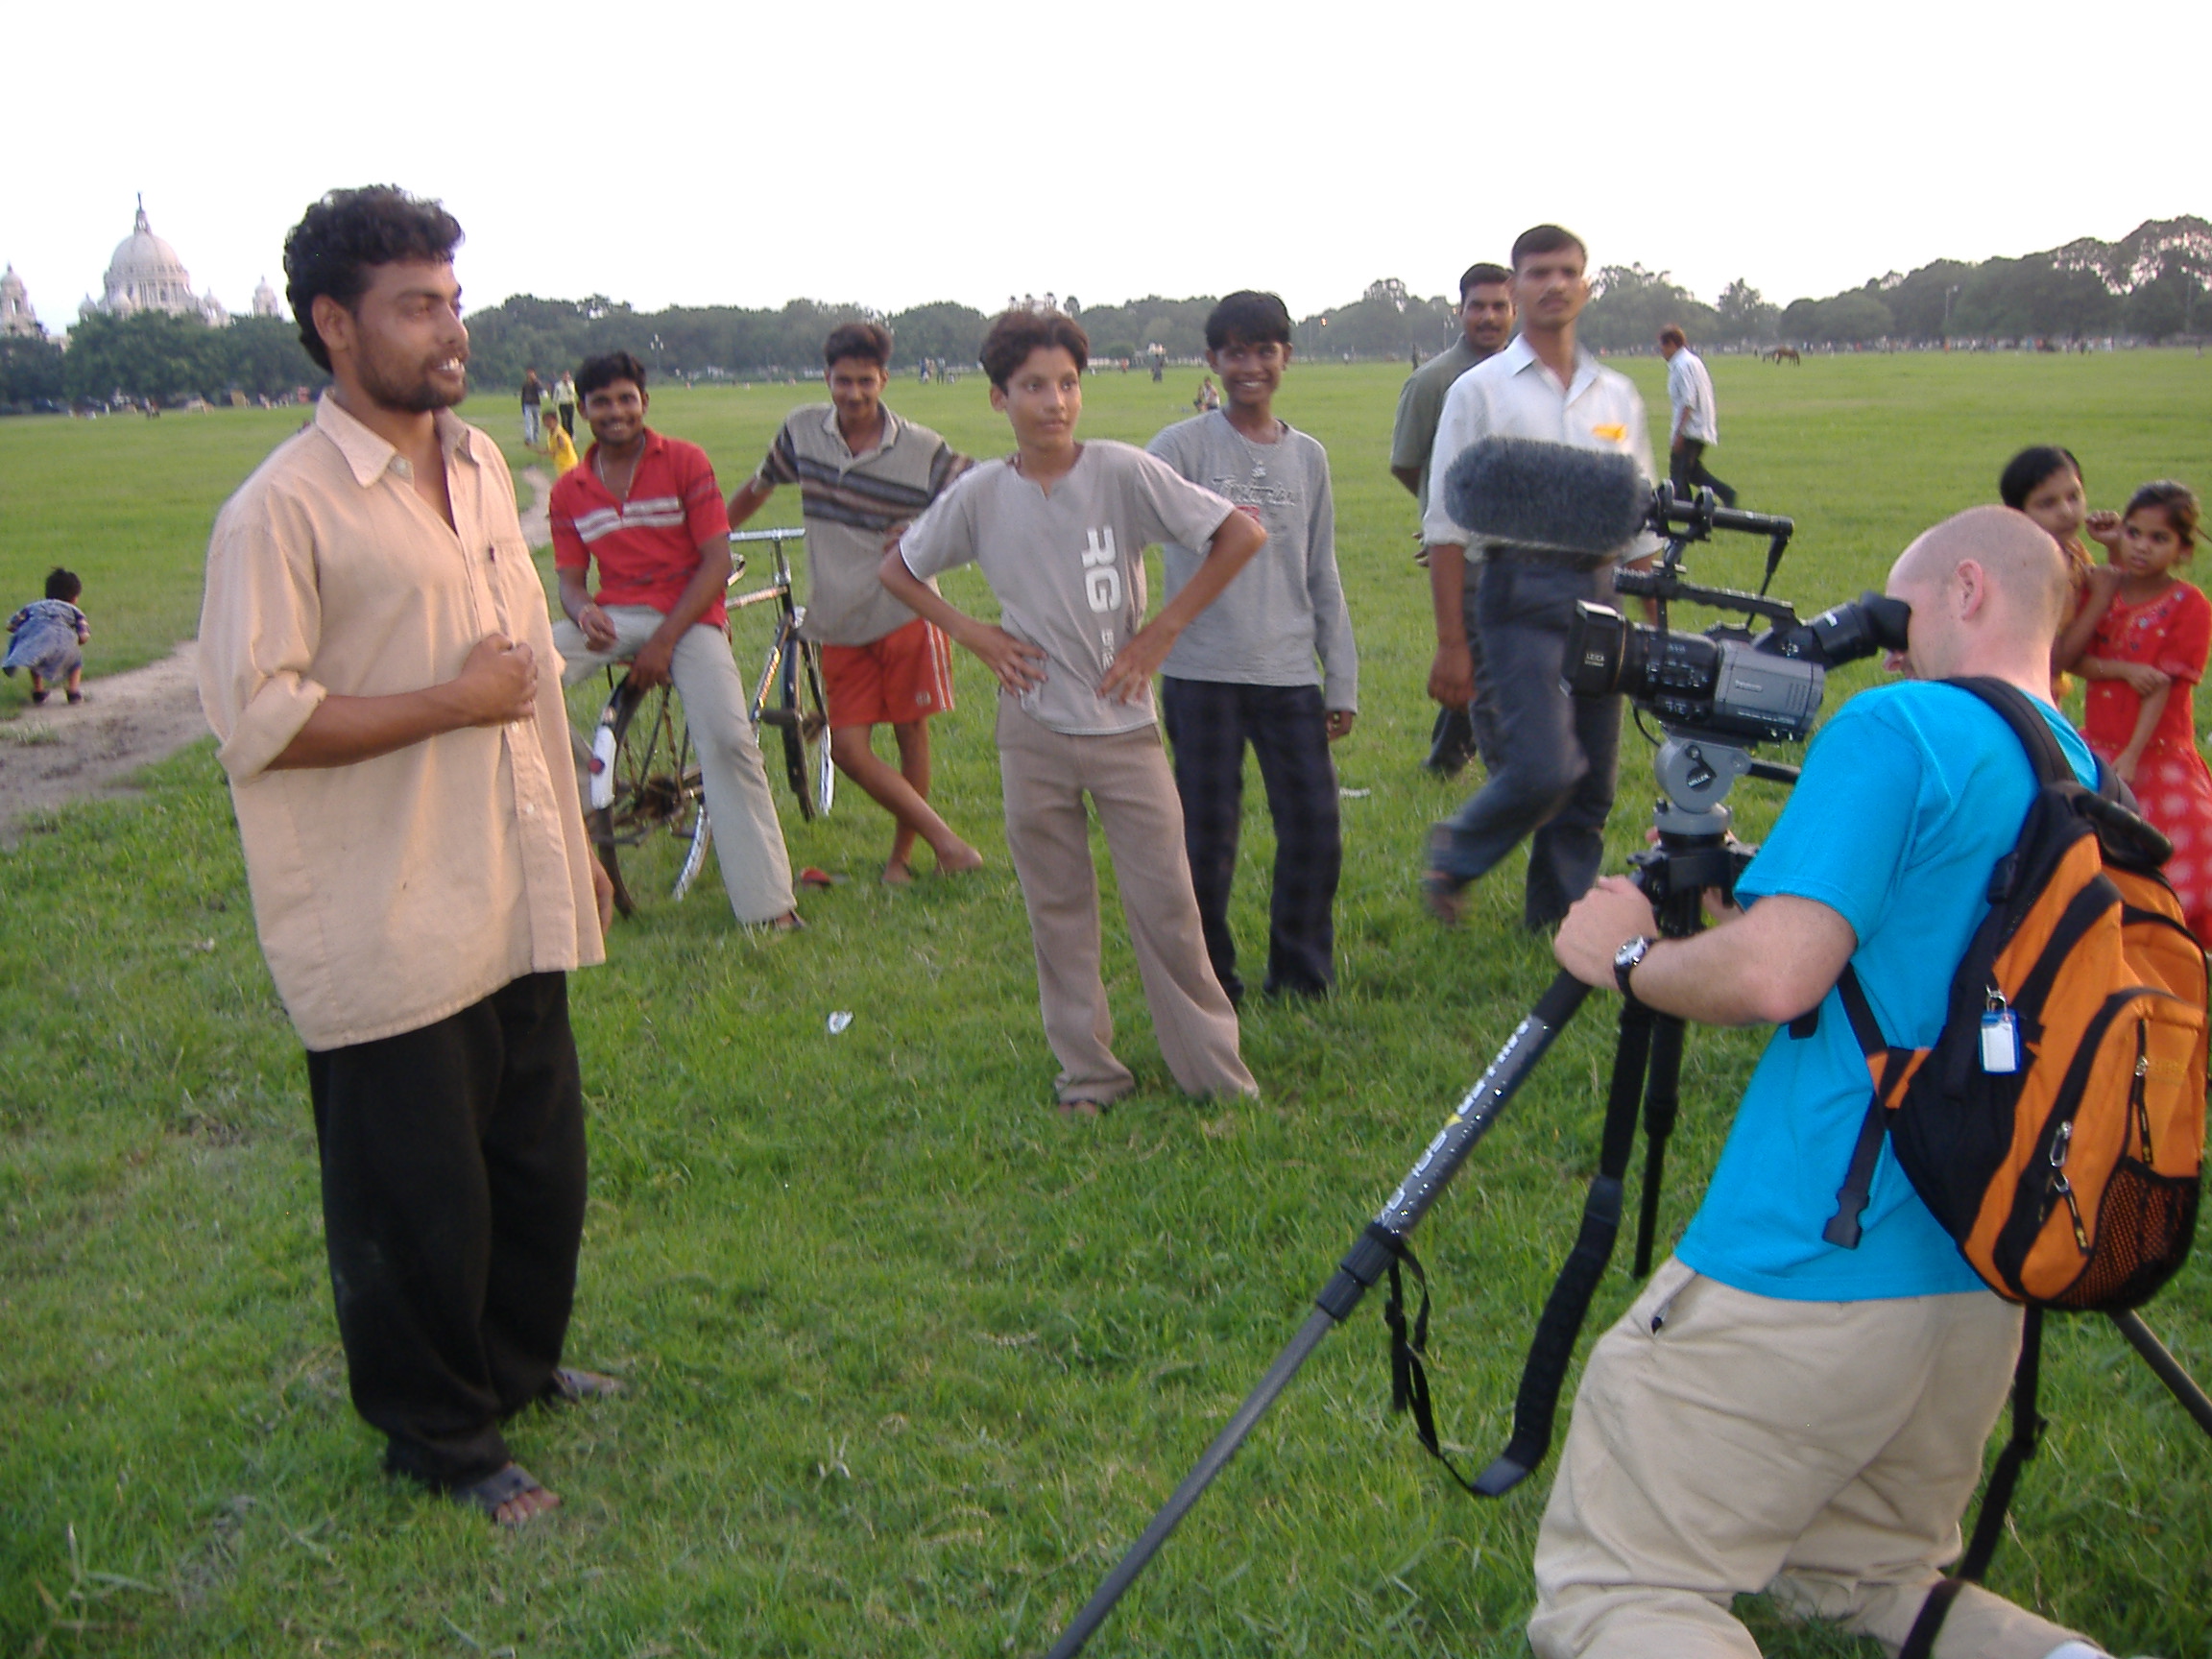 On location in Calcutta, India. Shooting for the documentary I MET WITH AN ACCIDENT